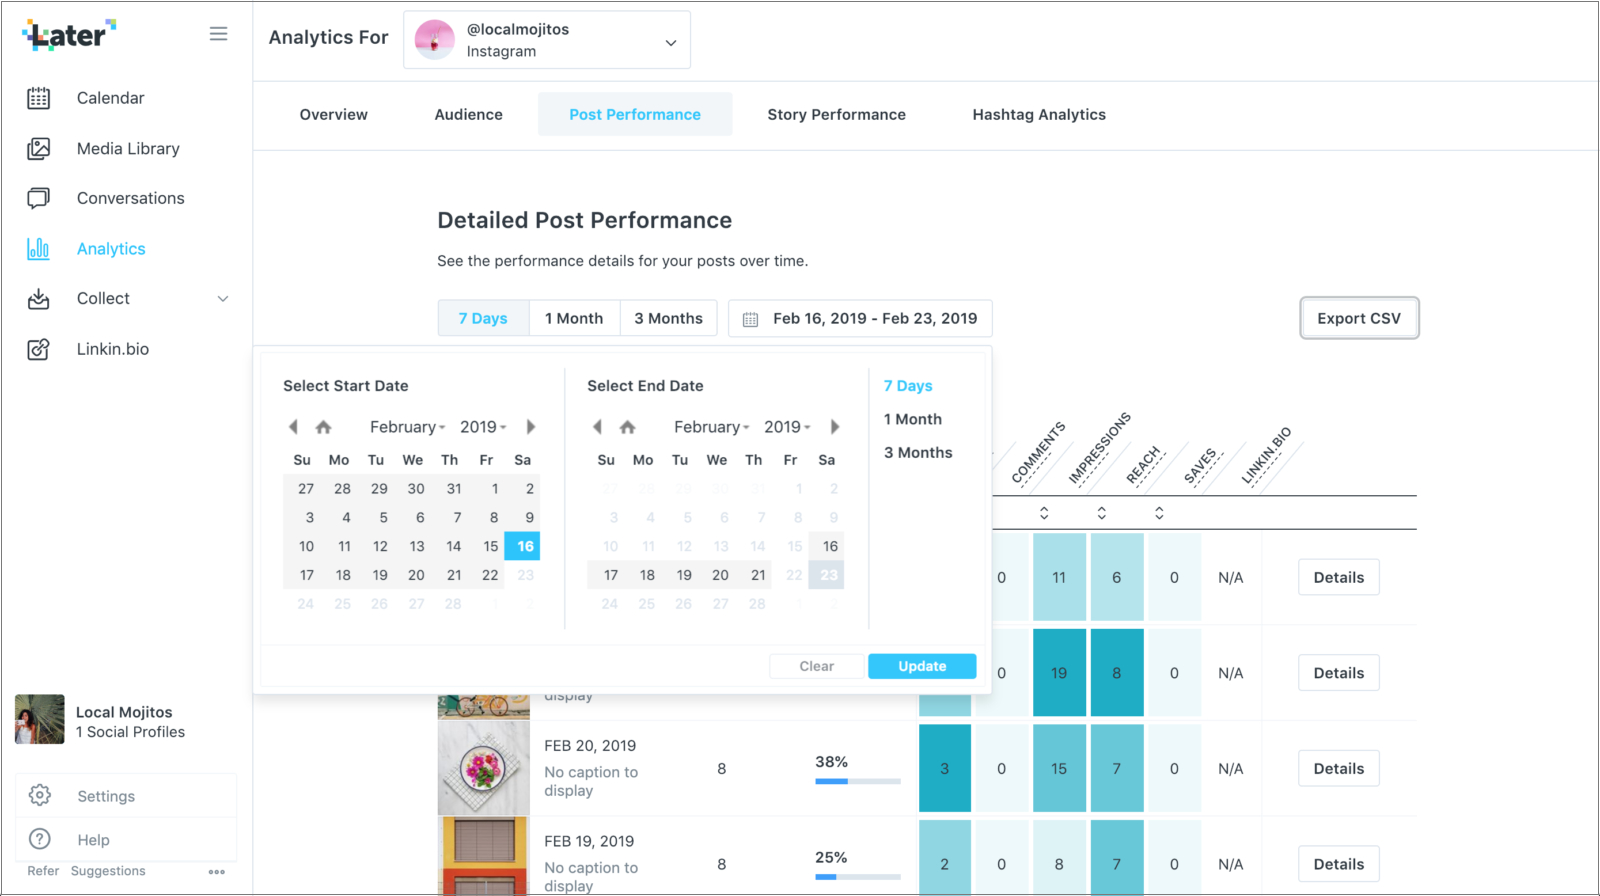 How To Build A Monthly Social Media Report In Weekly Social Media Report Template